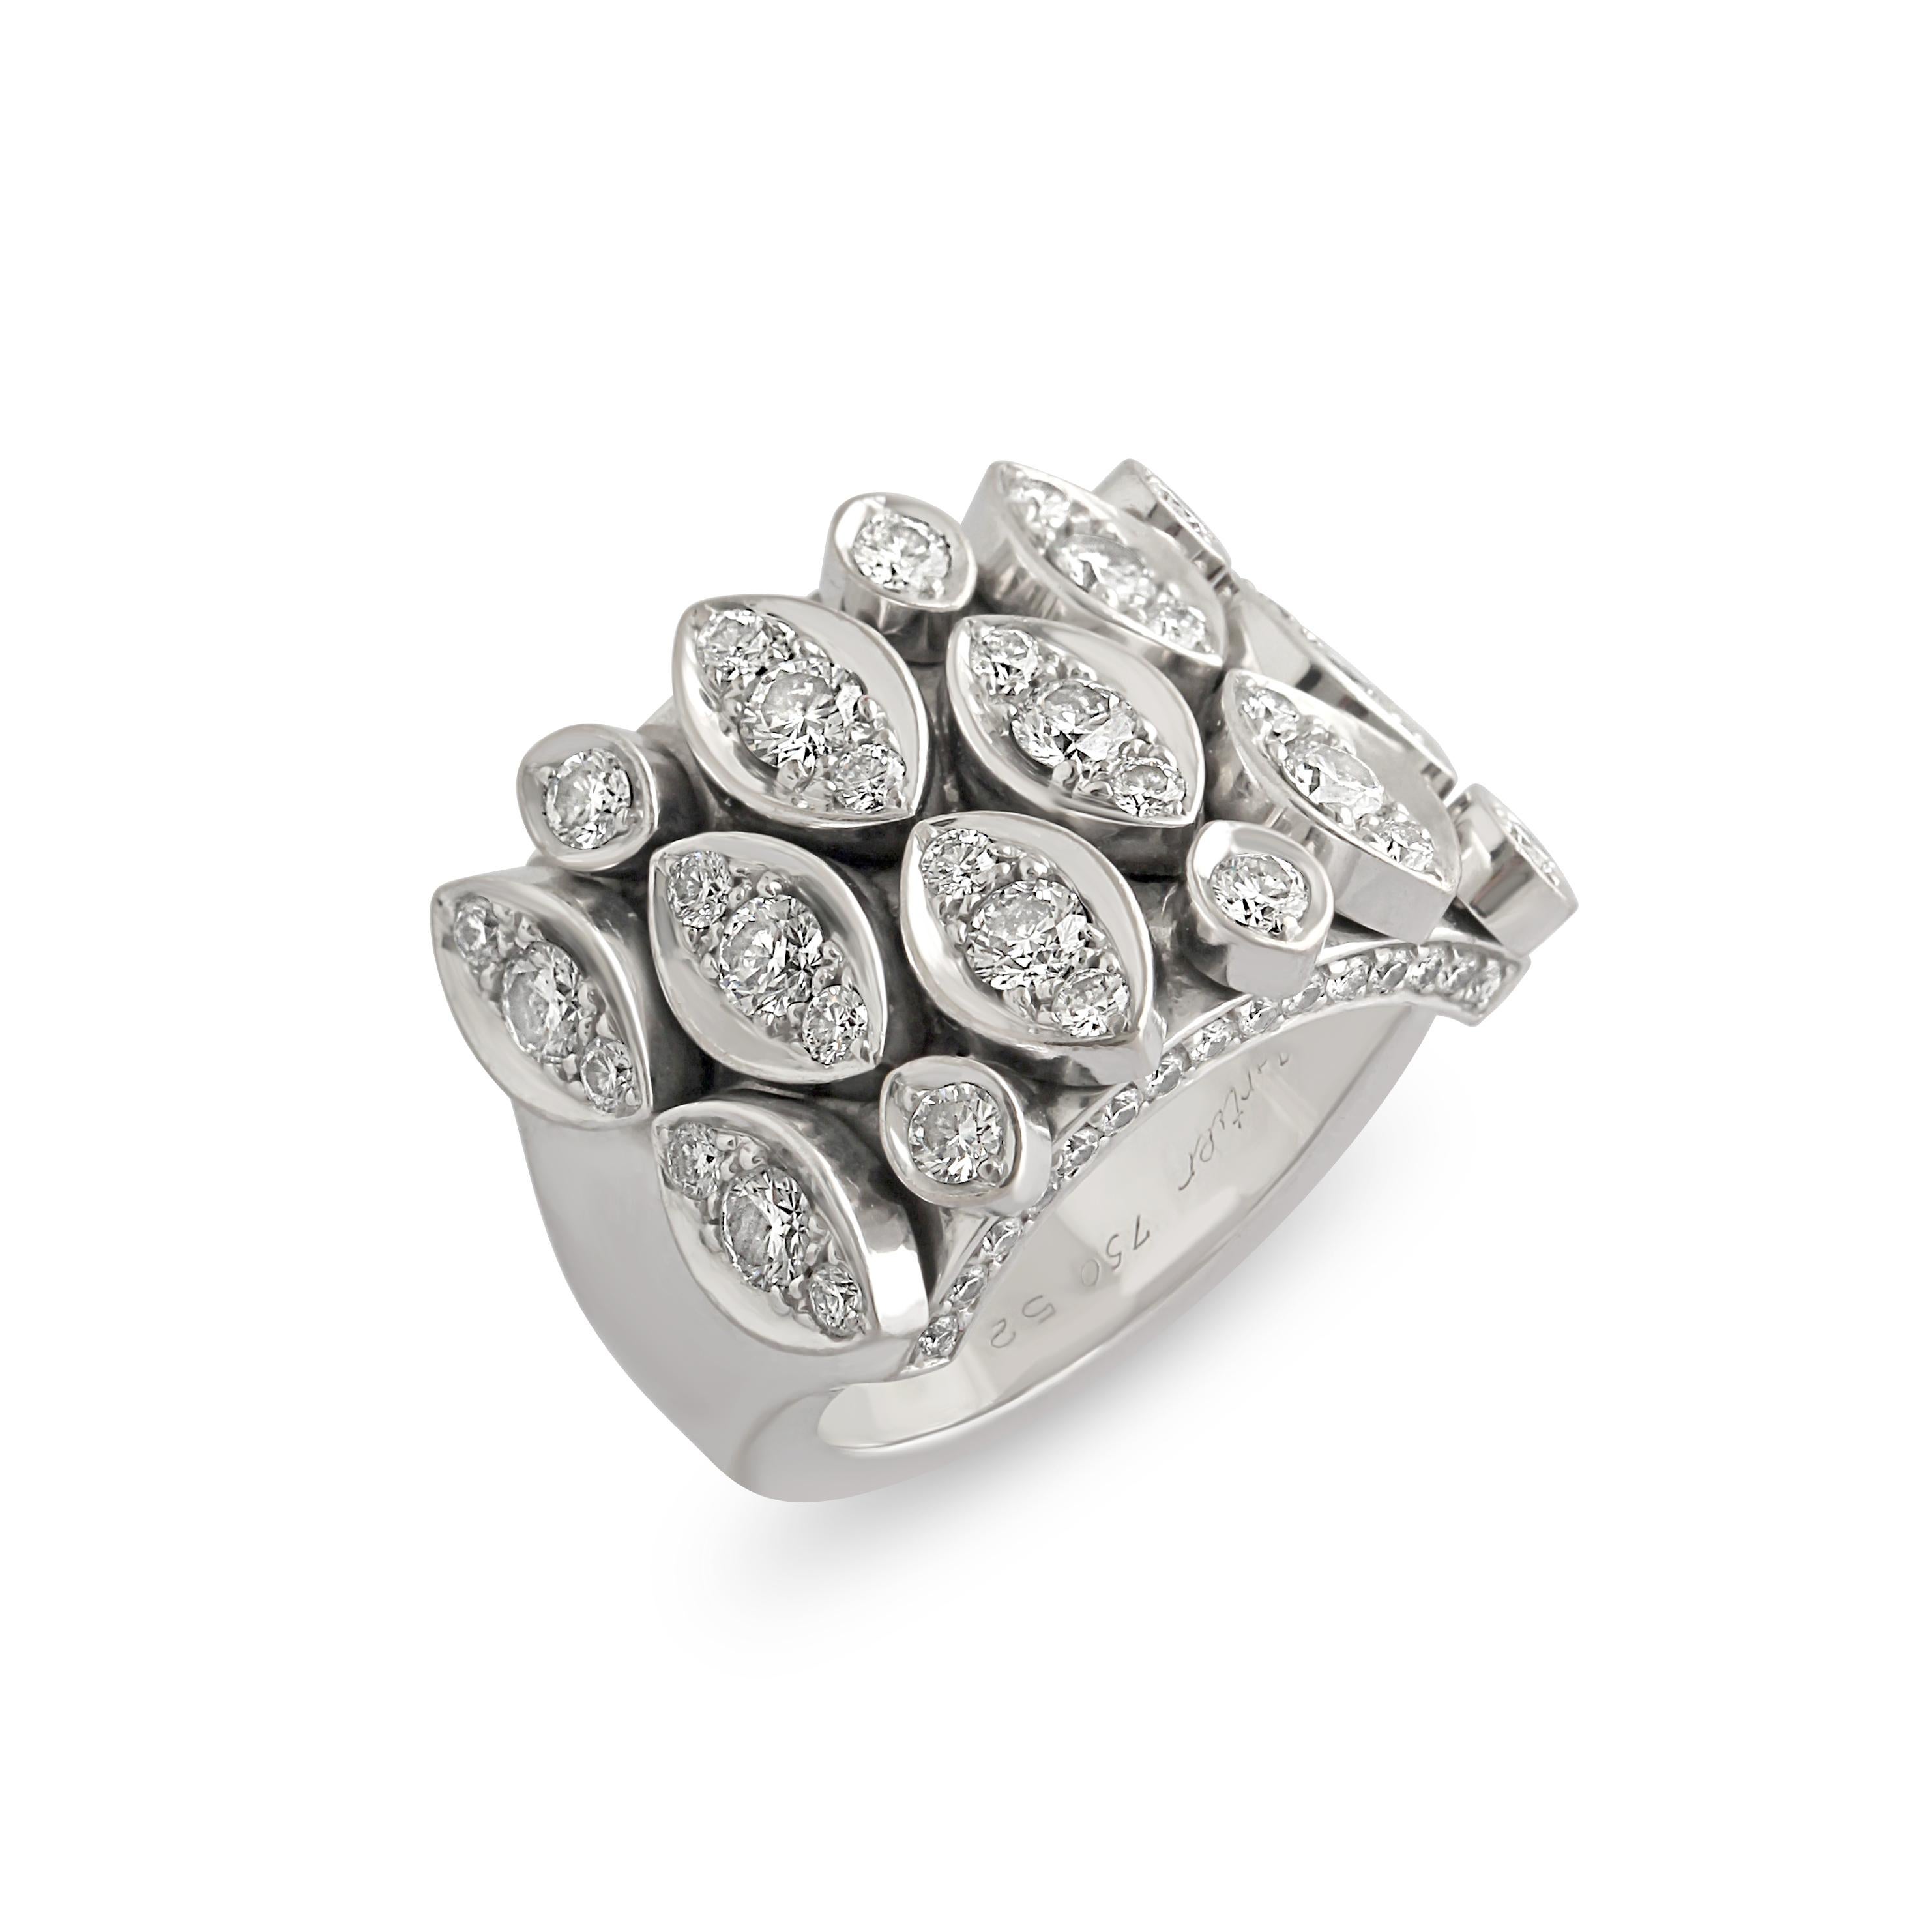 An 18k white gold and diamond ring ‘Diadea’ Ring by Cartier. A large cocktail ring with marquise shaped articulated panels set with diamonds, total diamond weight = approximately 1.60 carats.
